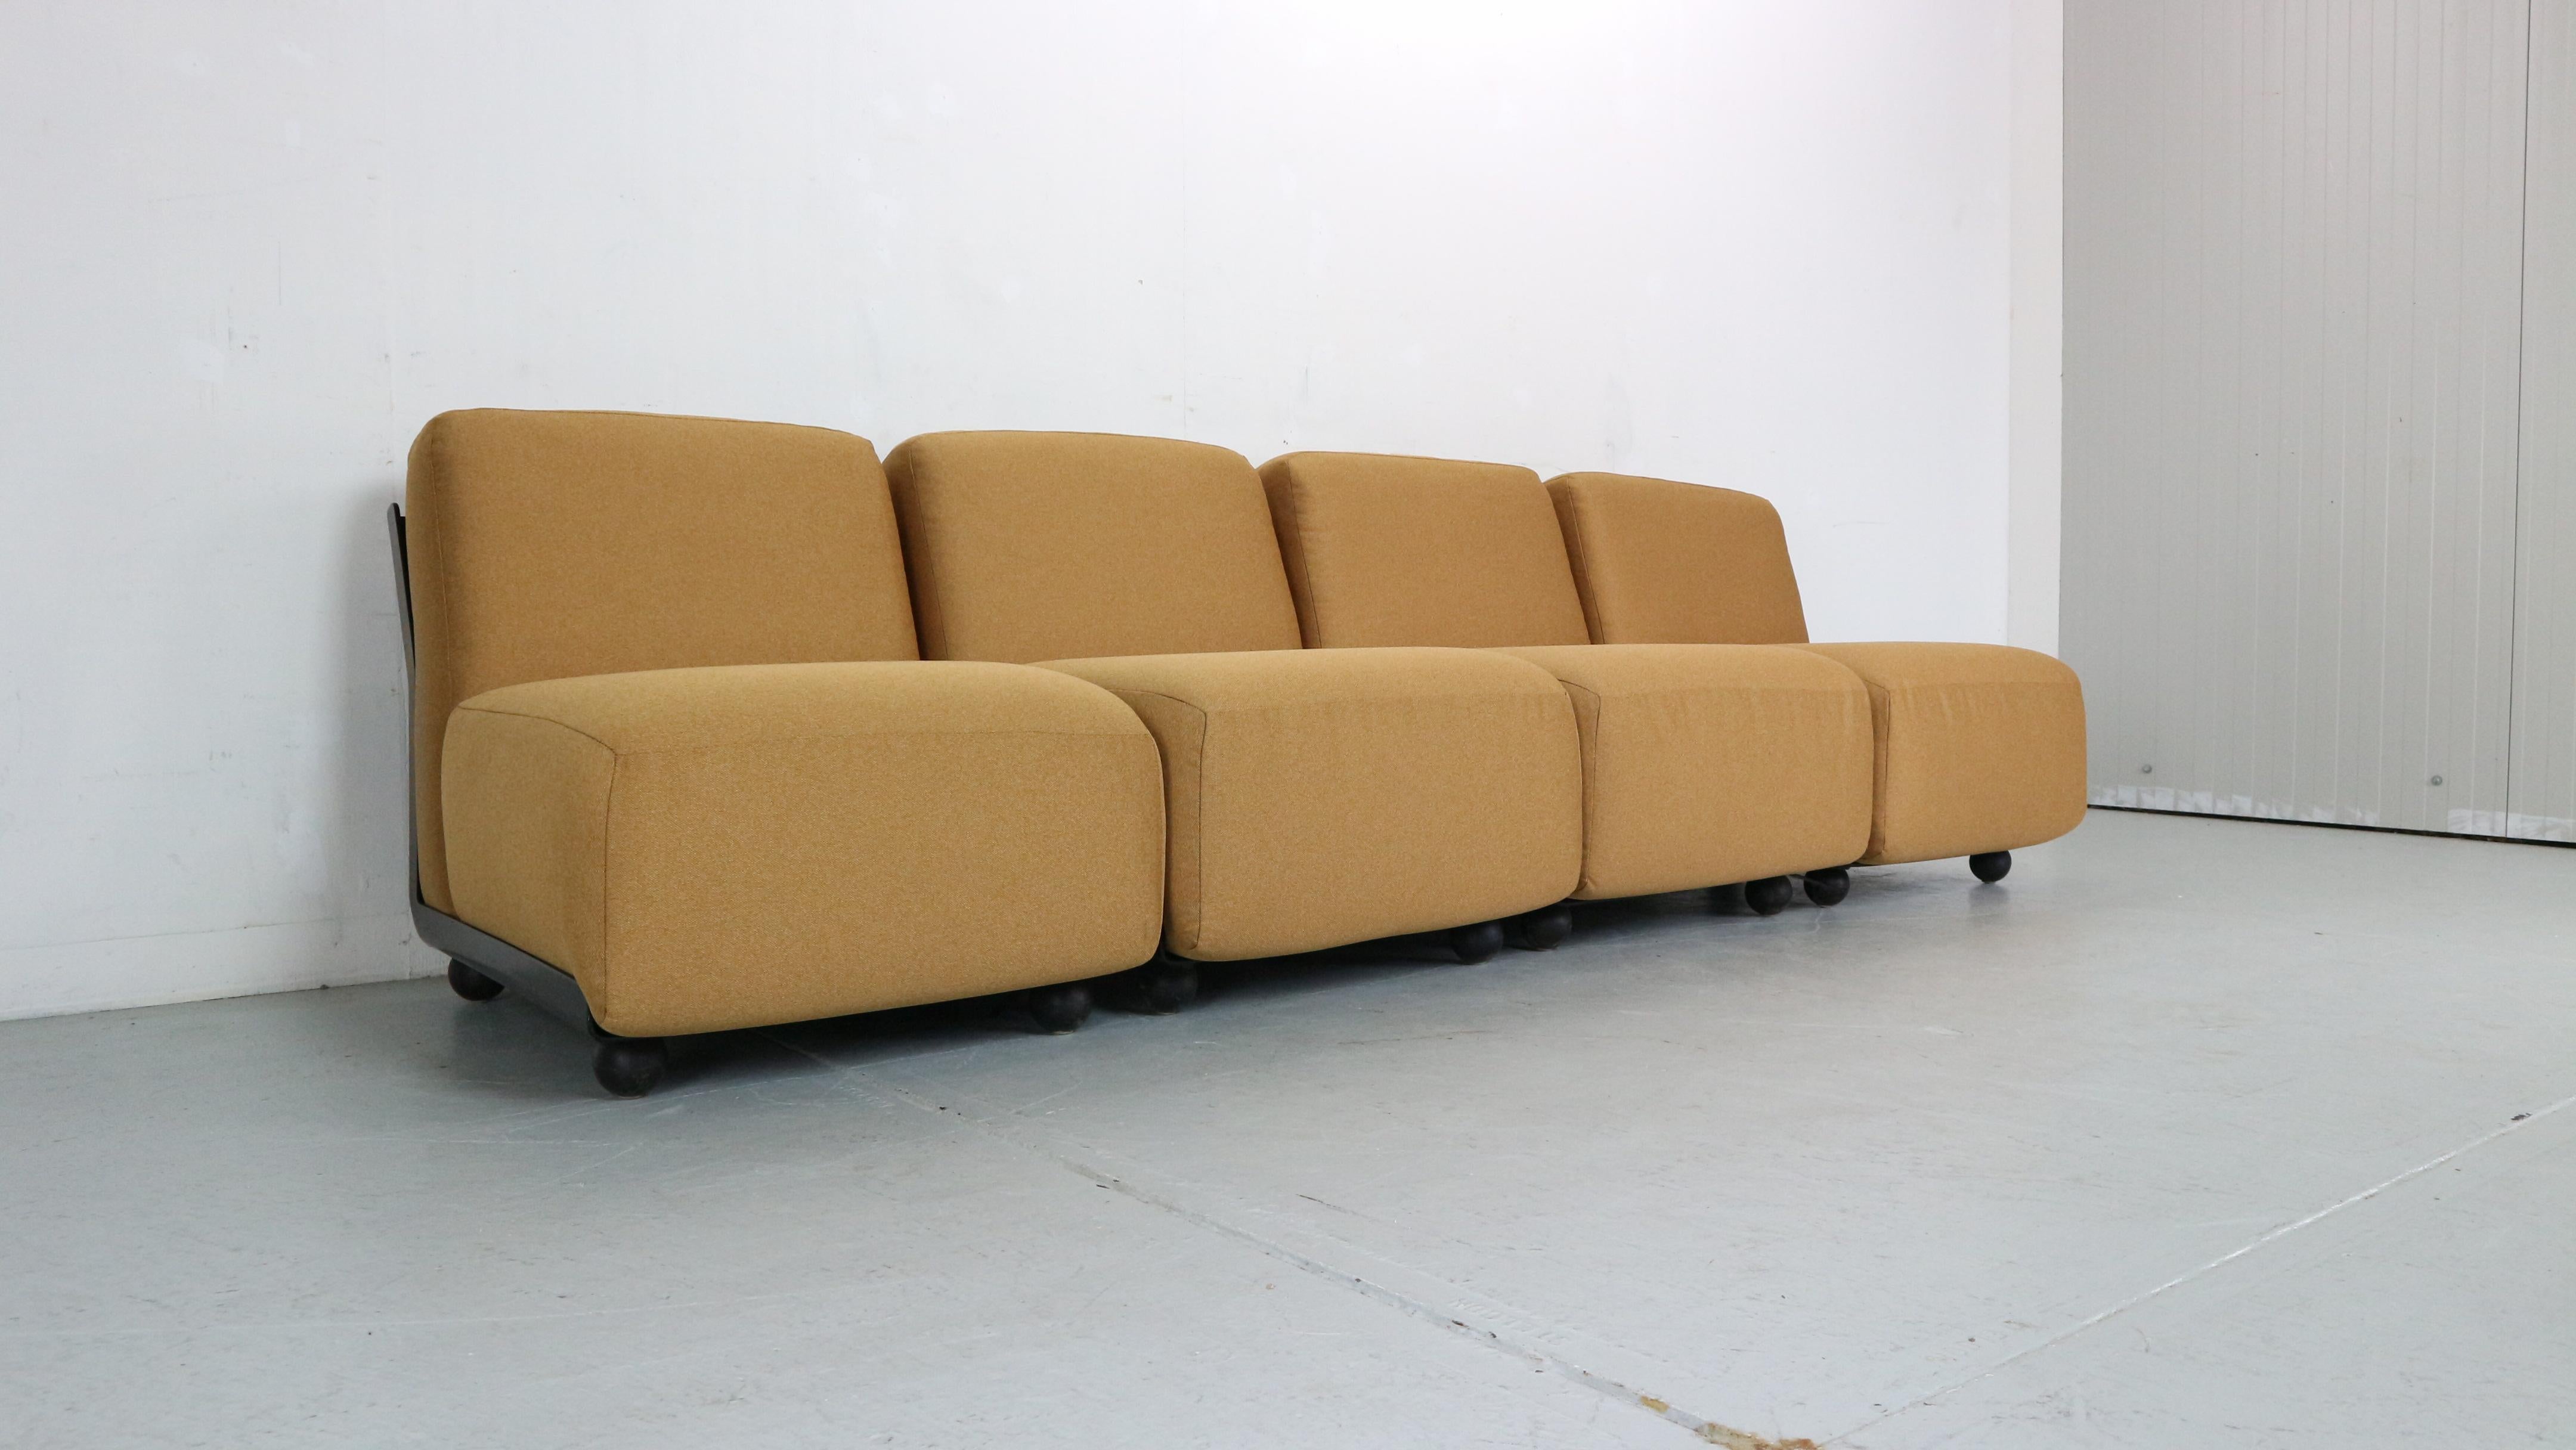 Italian Amanta 24 Chairs by Mario Bellini for C&B, 1970s For Sale 1